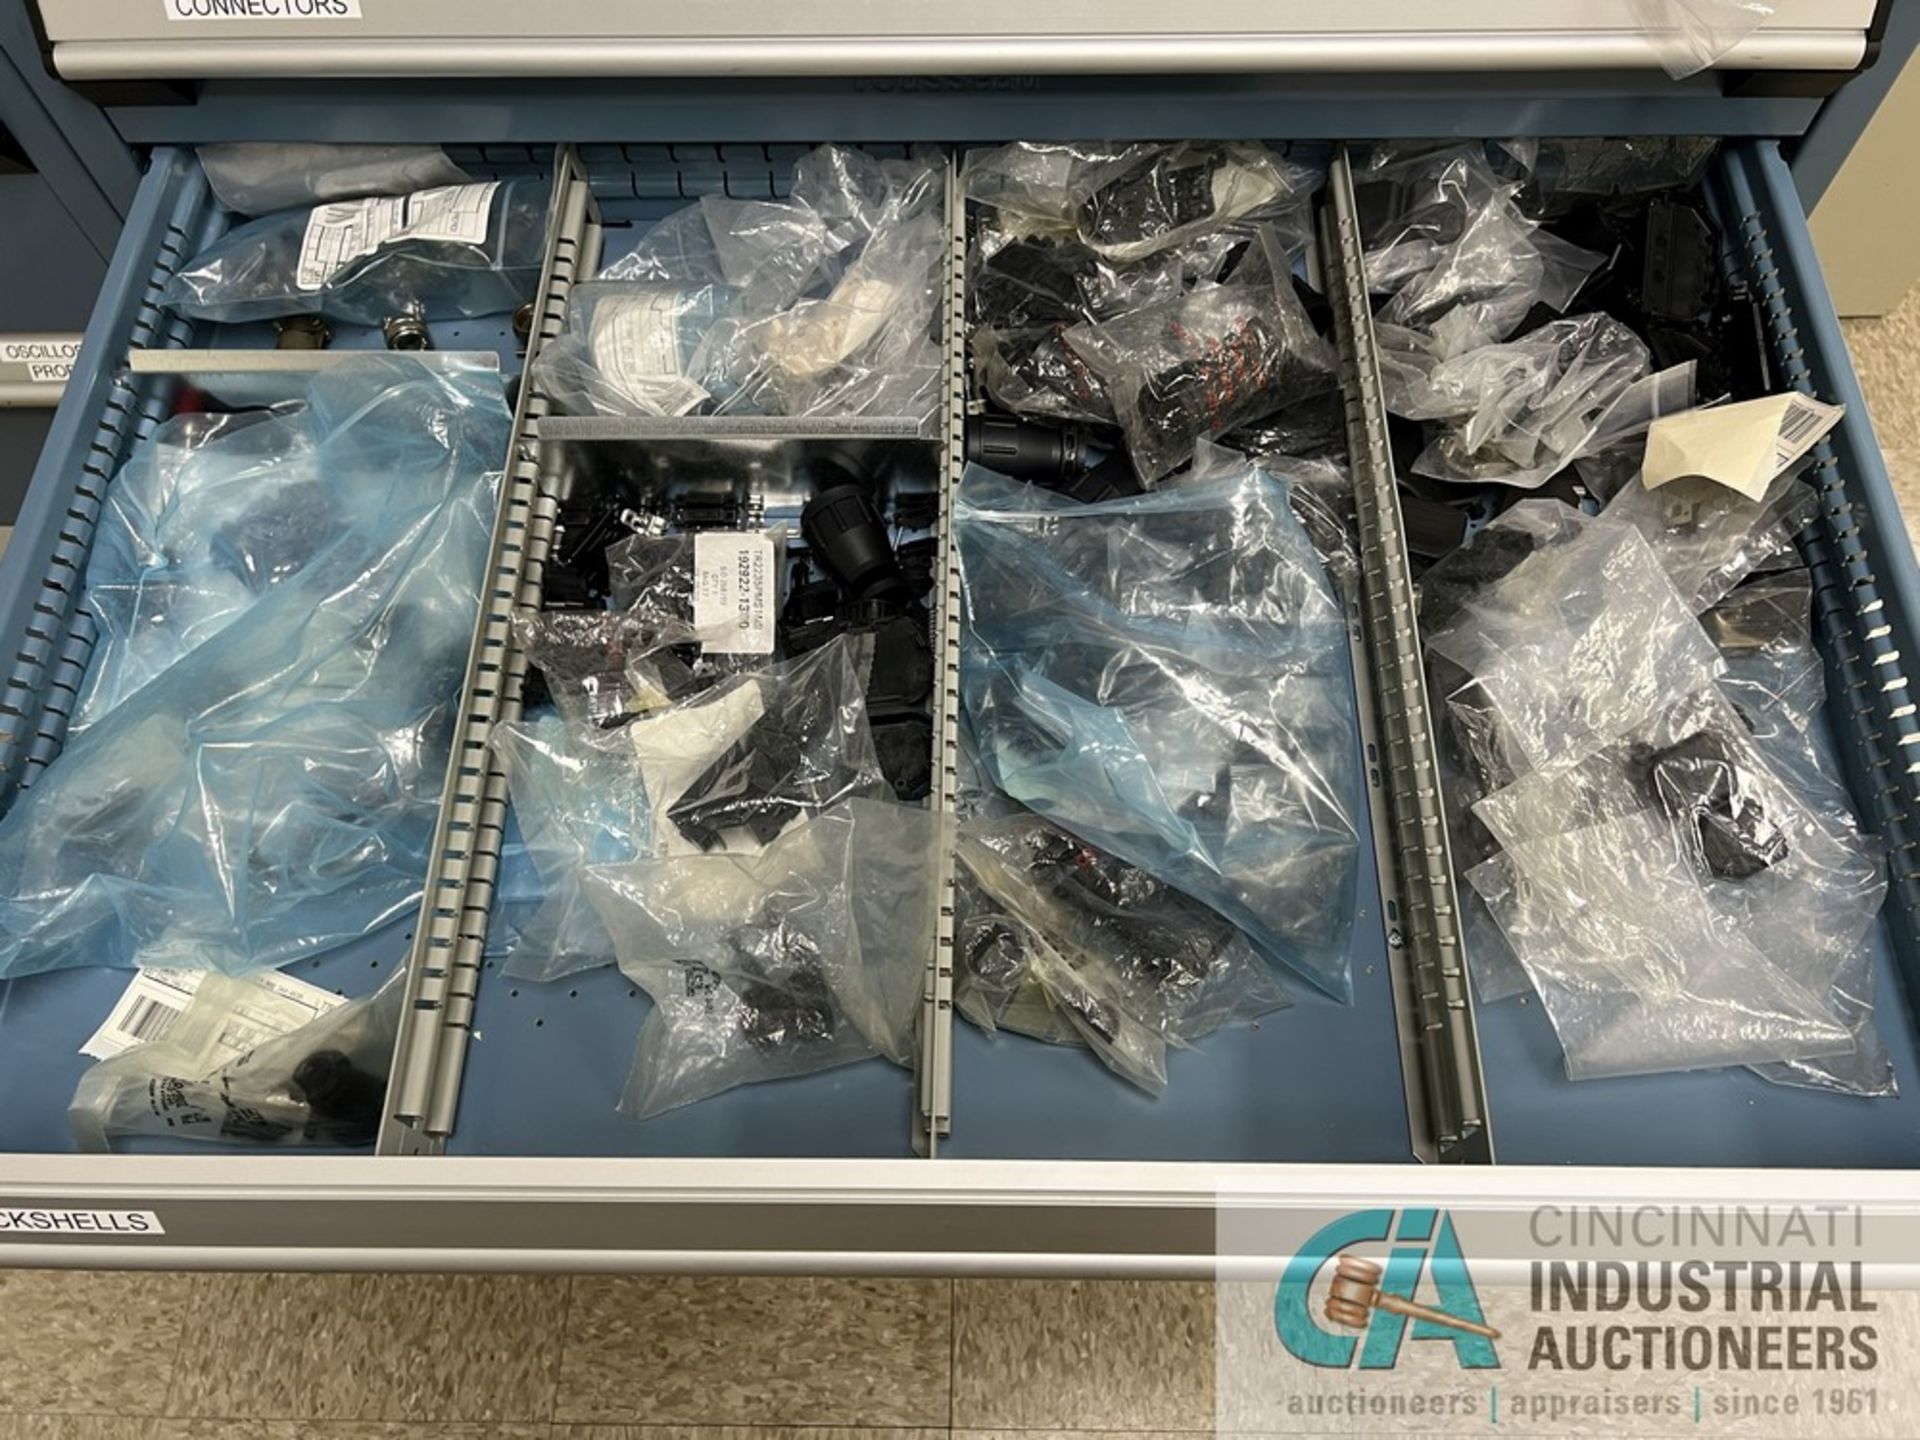 14-DRAWER ROUSSEAU PARTS CABINET WITH CONTENTS INCLUDING WIRING, CONNECTORS, SOLENOIDS, MOTORS, - Image 11 of 15